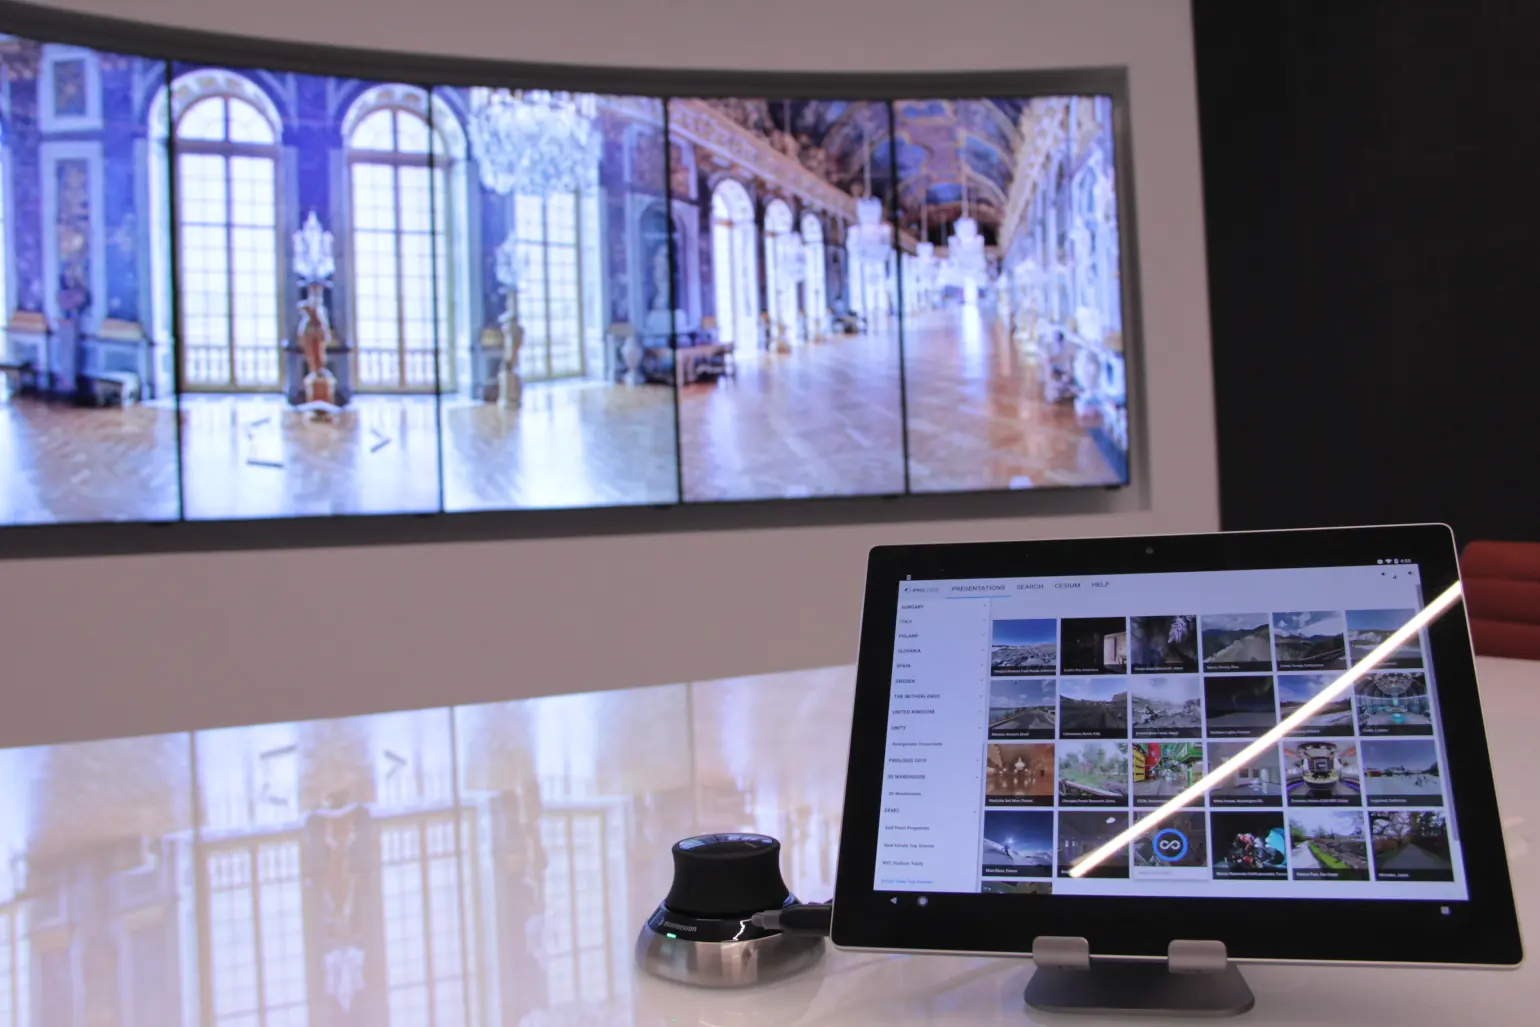 A 3D mouse and a tablet sit on a reflective white table, in front of a VisionPort 7-screen array enclosed in a nice white cabinet. On the screen is displayed a 360-degree panorama of a museum.